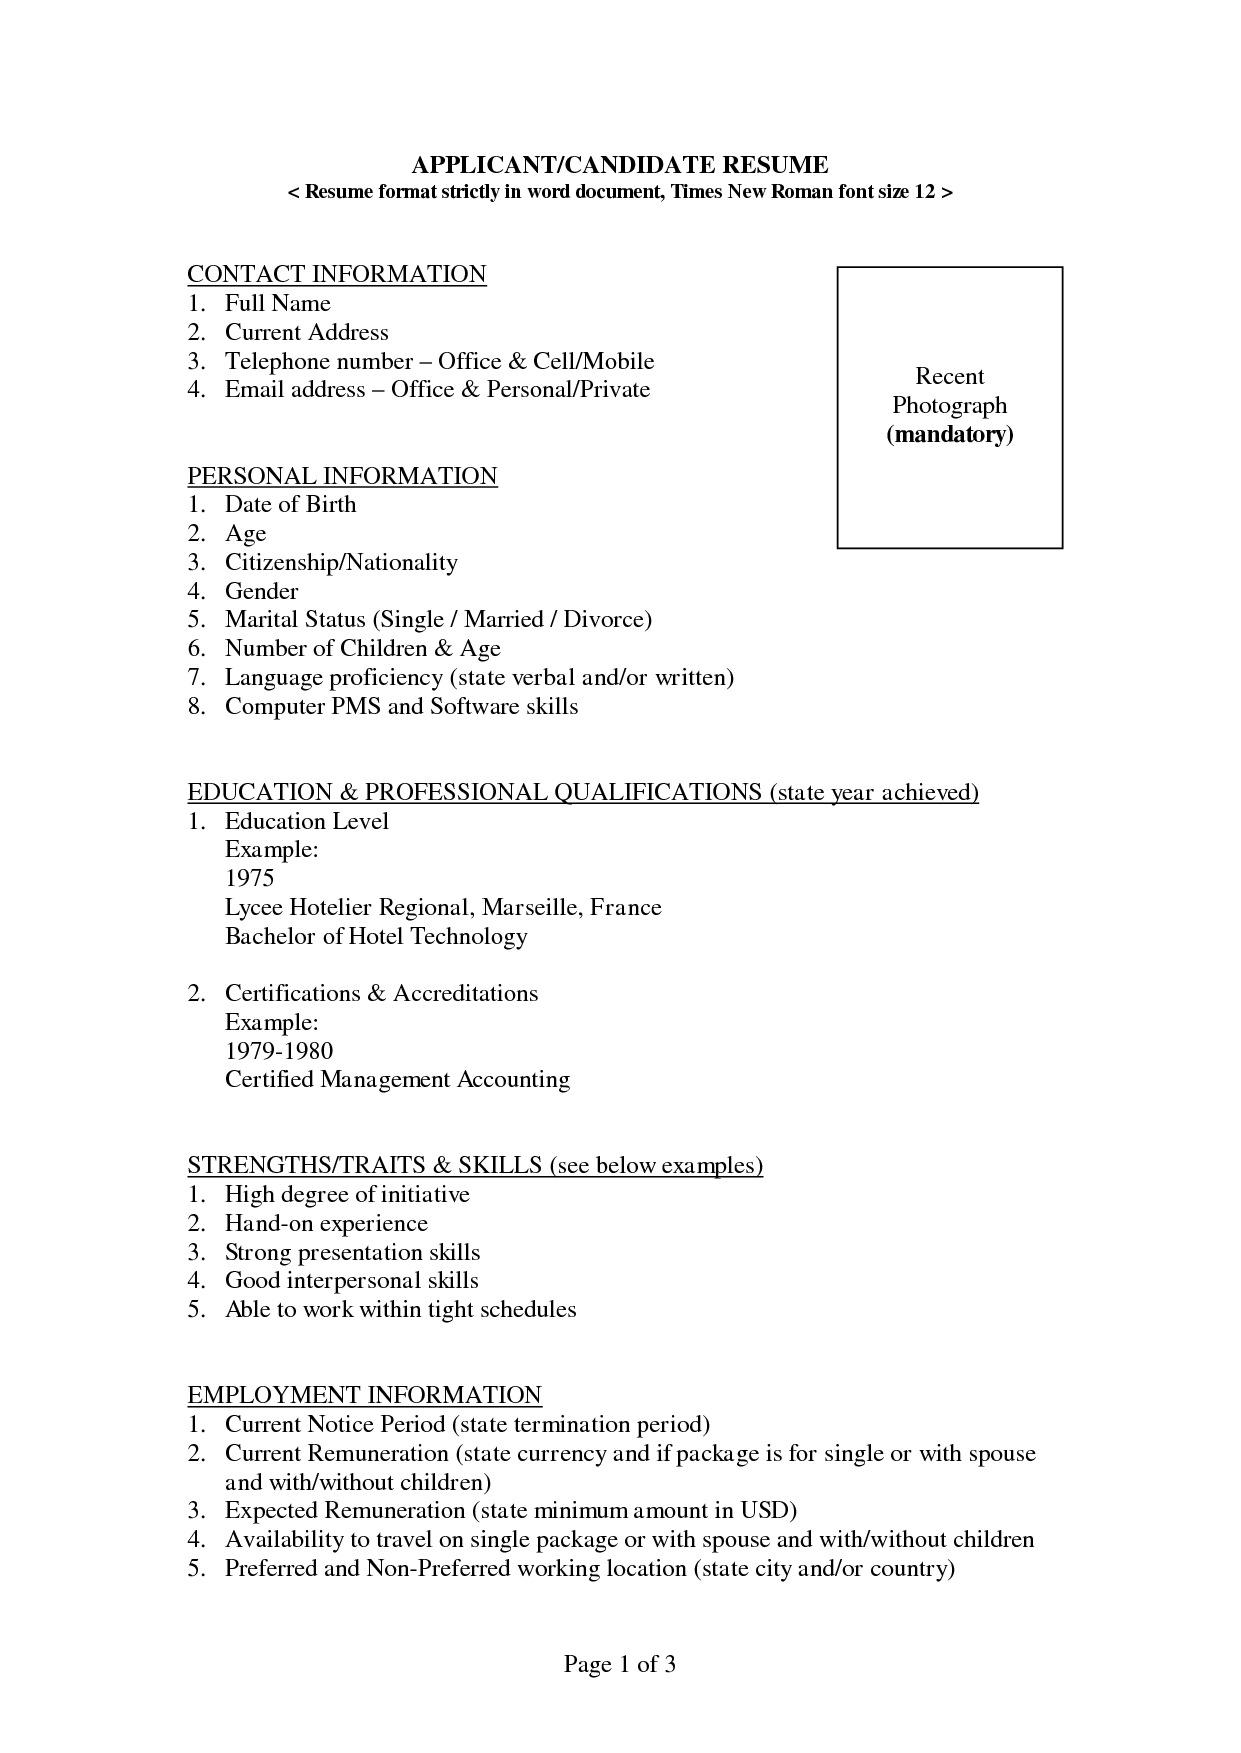 Severance Letter Template Free - Free Basic Resume Templates Download Best Resume Template Job